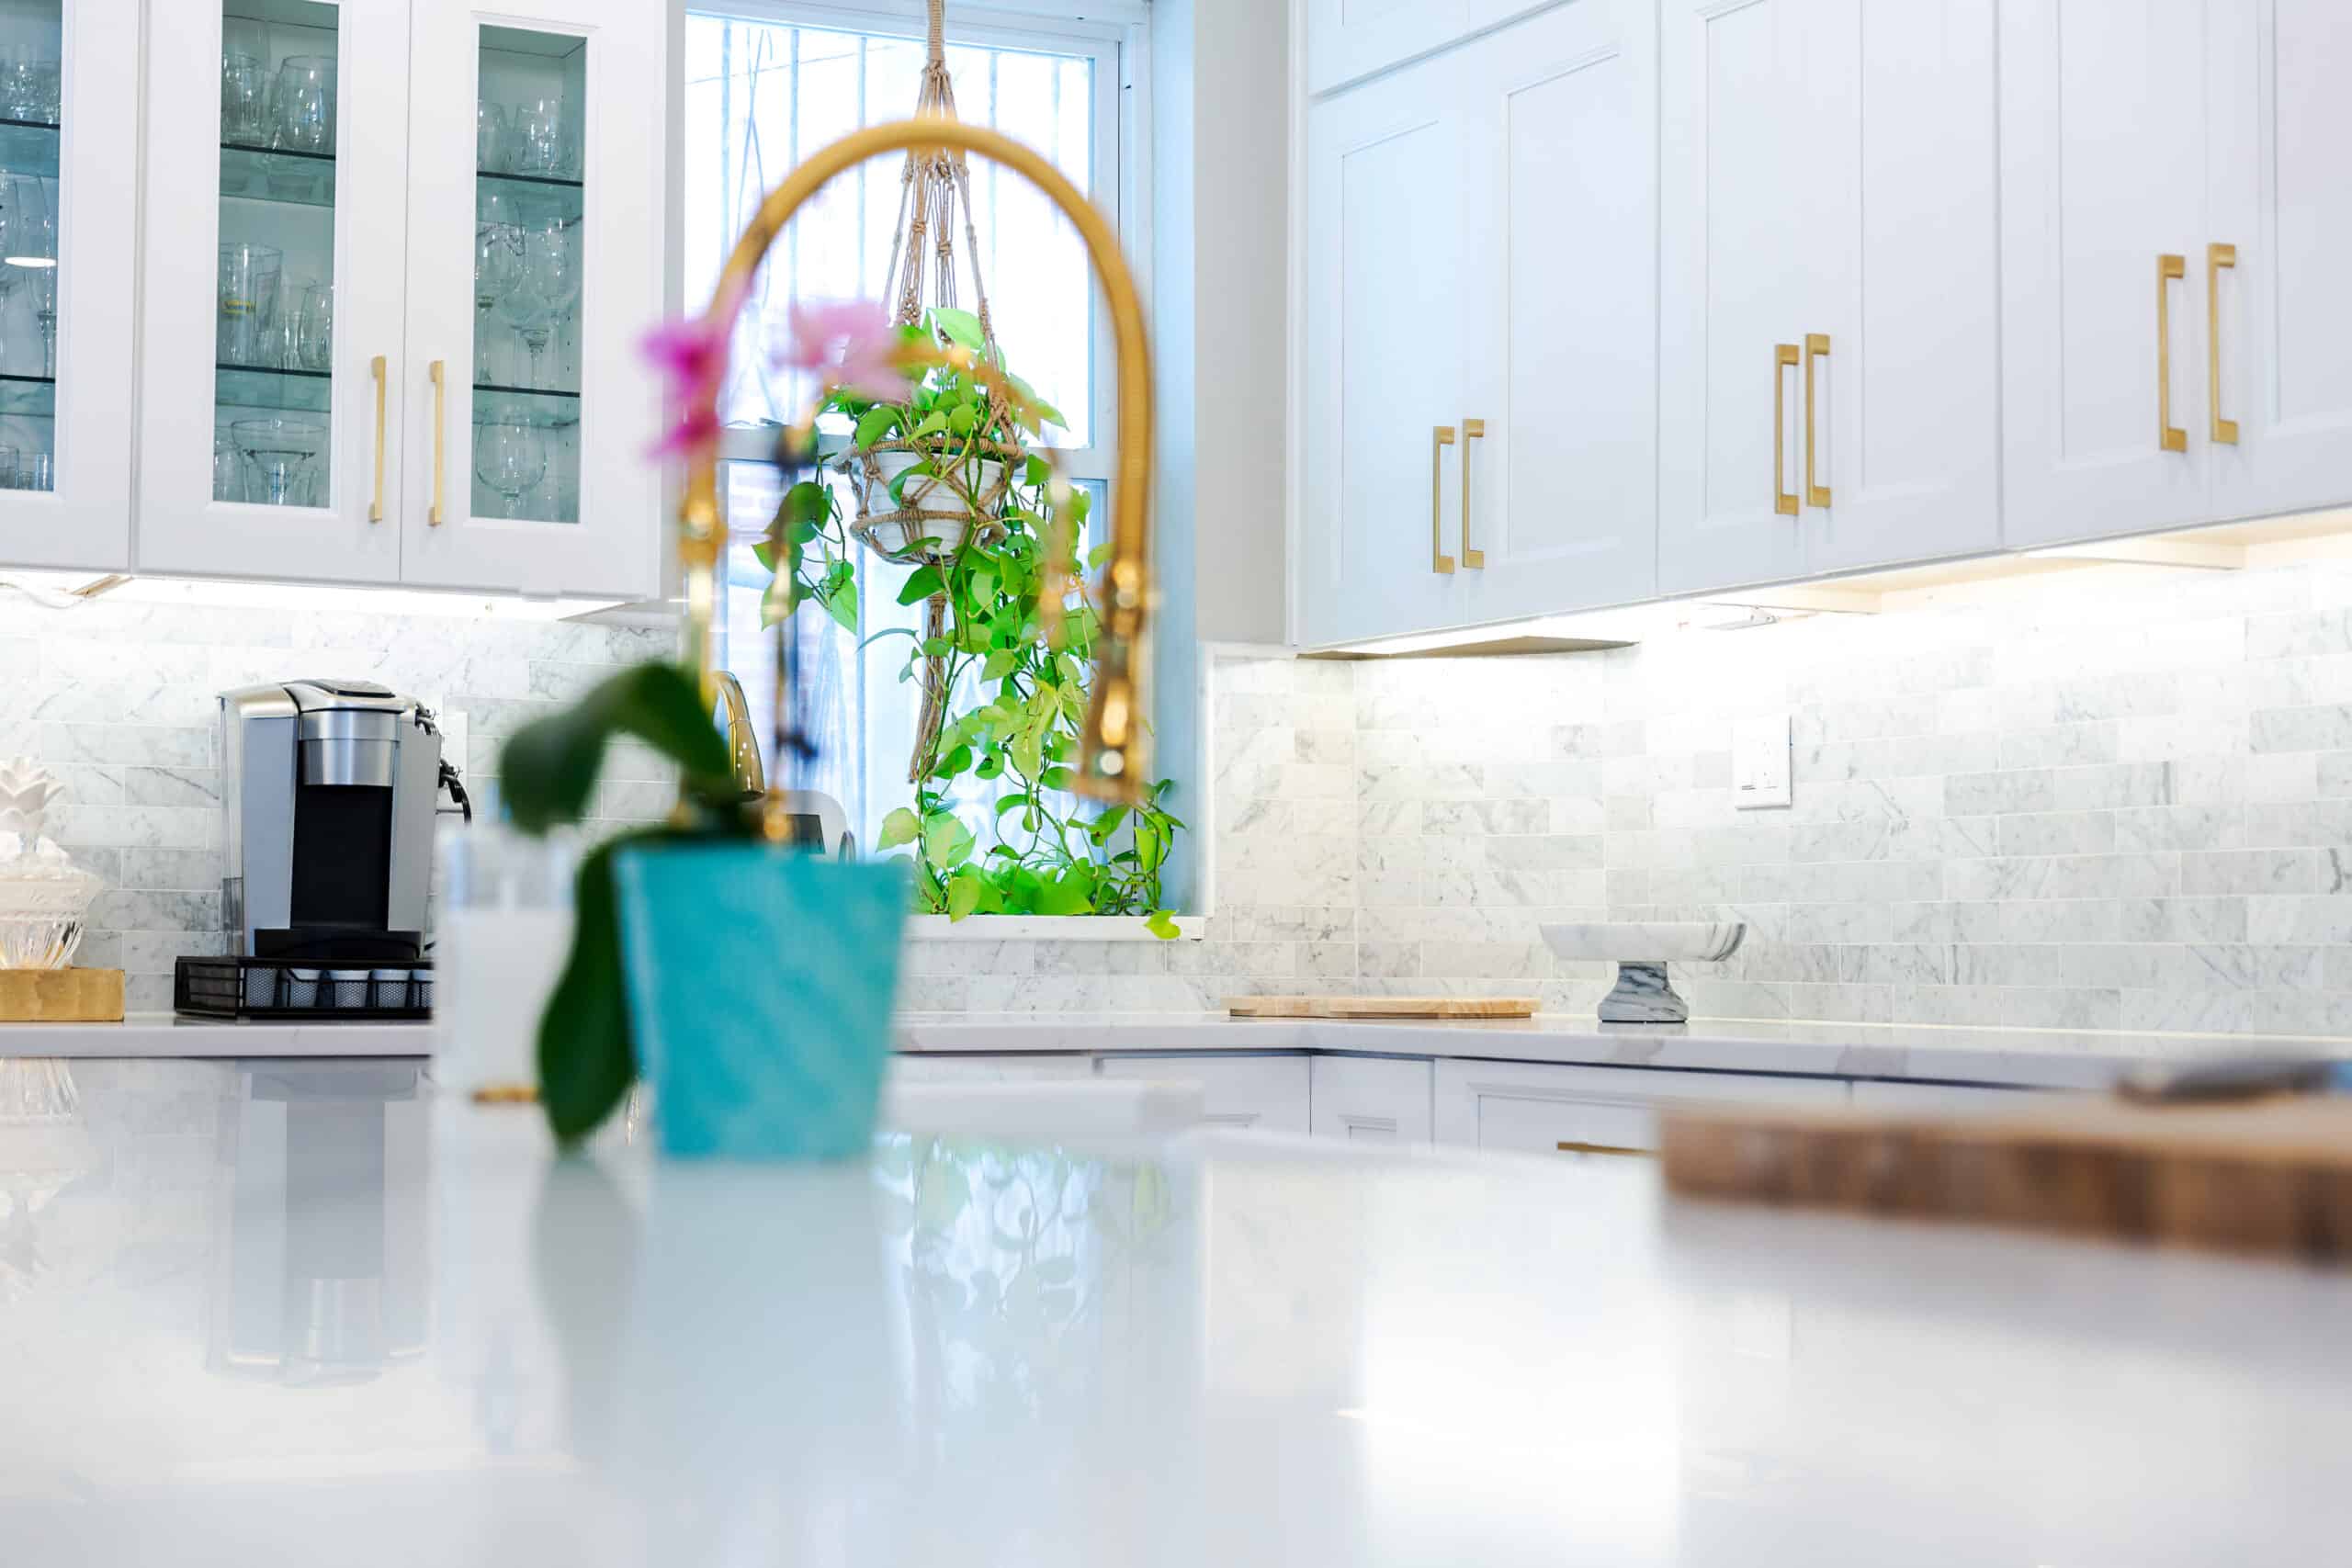 A kitchen with white cabinets and a gold faucet